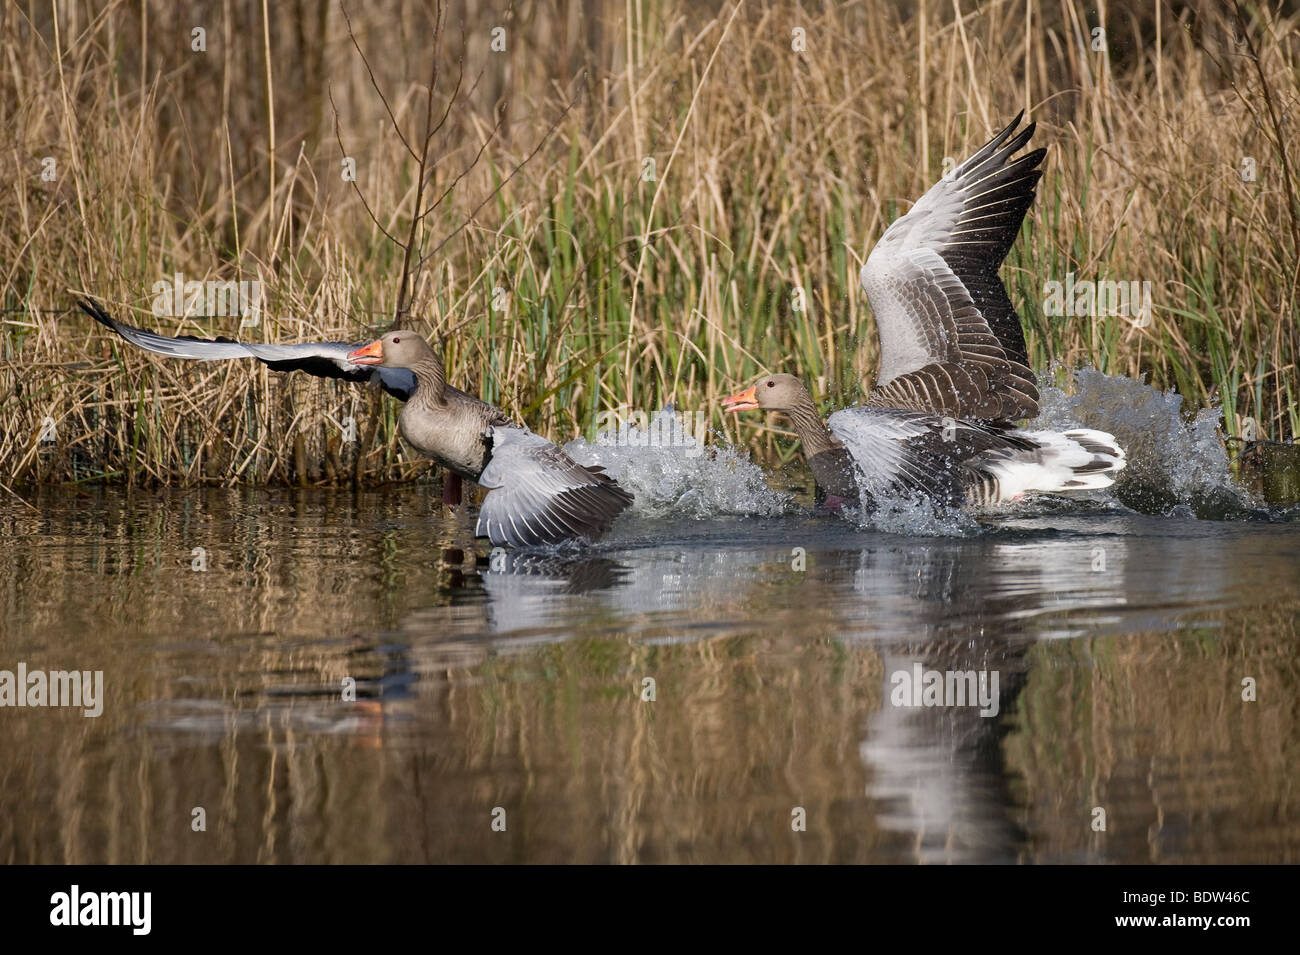 Courting greylag geese Stock Photo